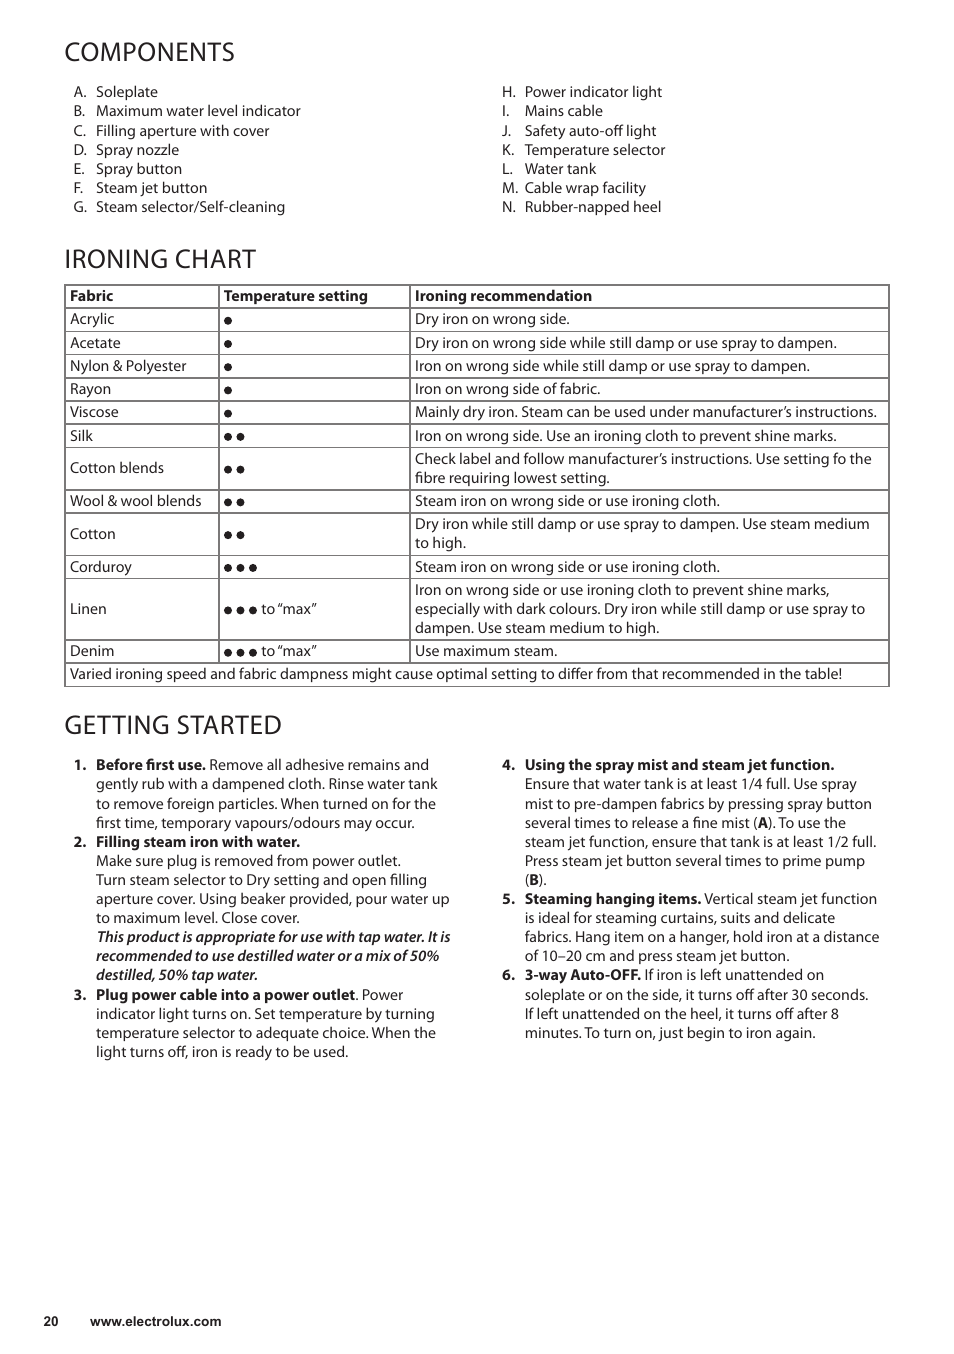 Components, Ironing chart, Getting started | Electrolux EDB5220 User Manual  | Page 20 / 84